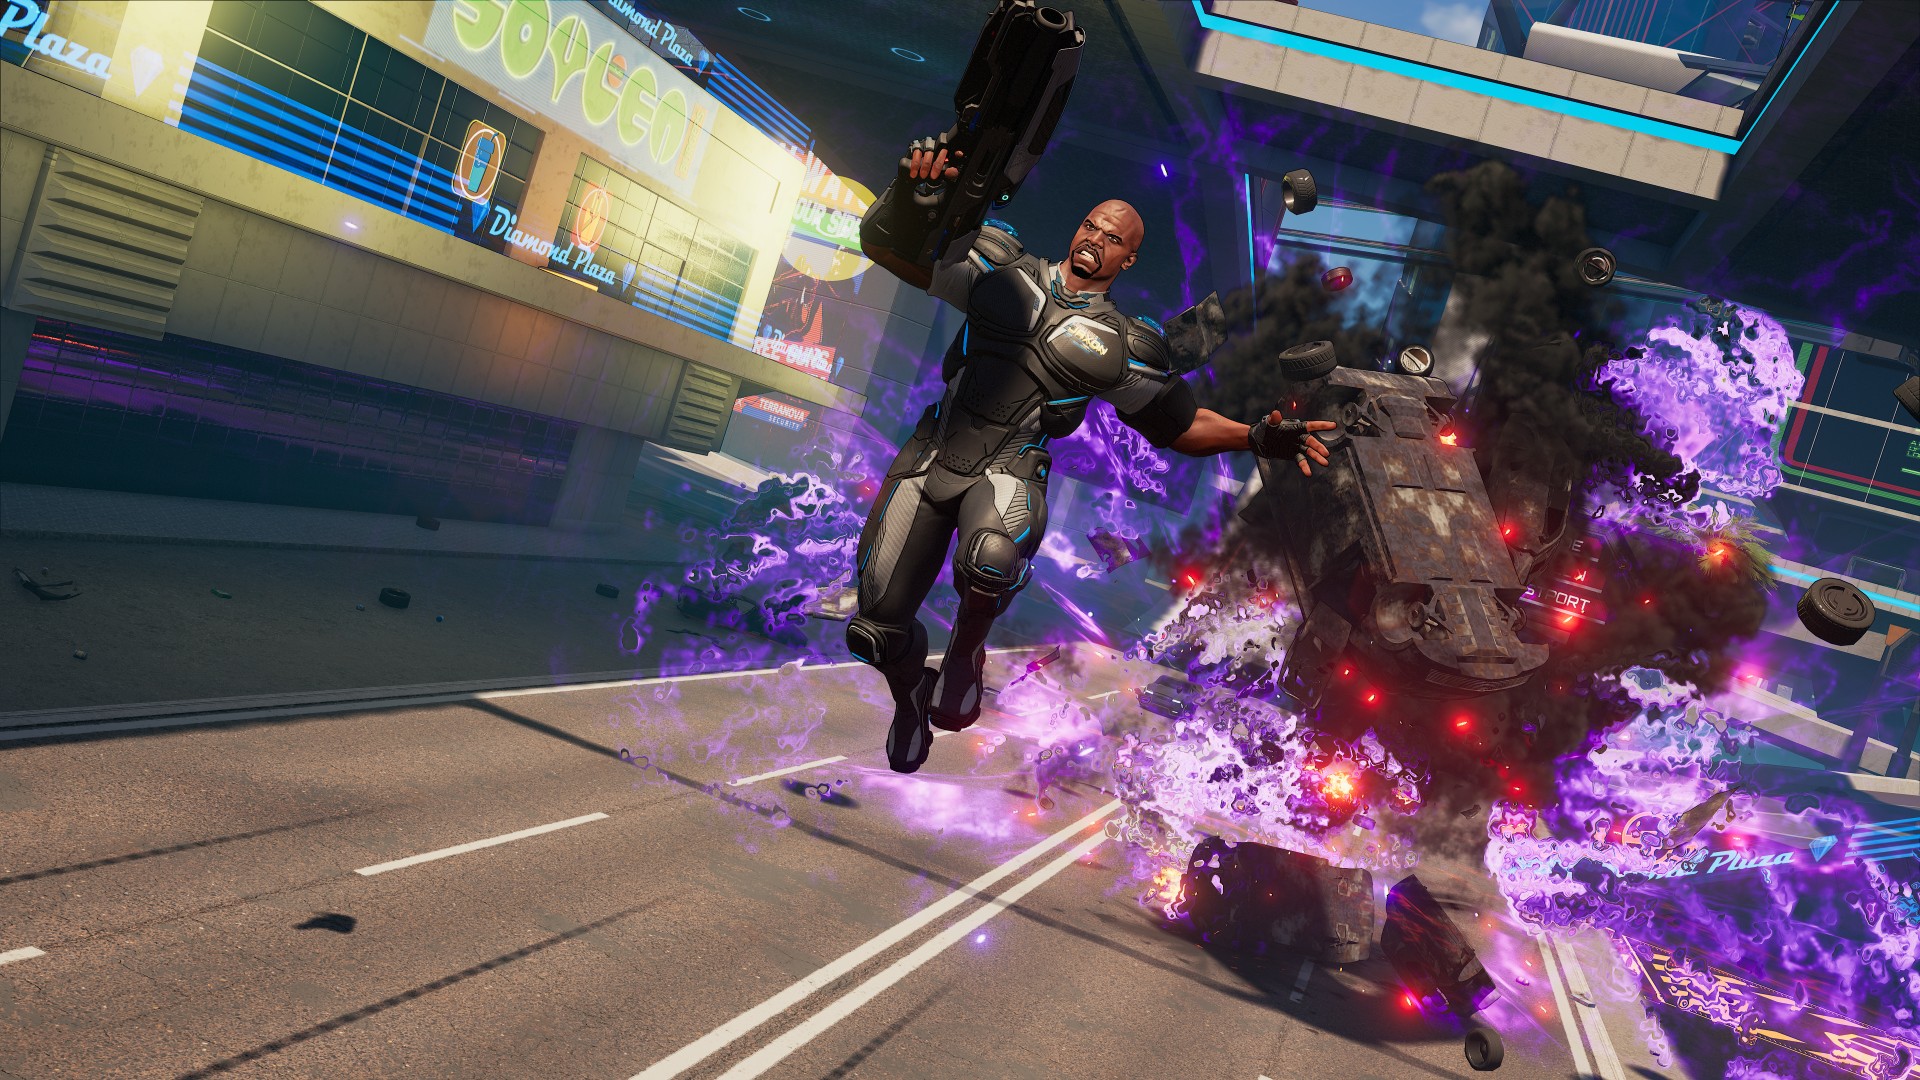 We Suit up with Crackdown 3’s Campaign Before Its February 15 Release